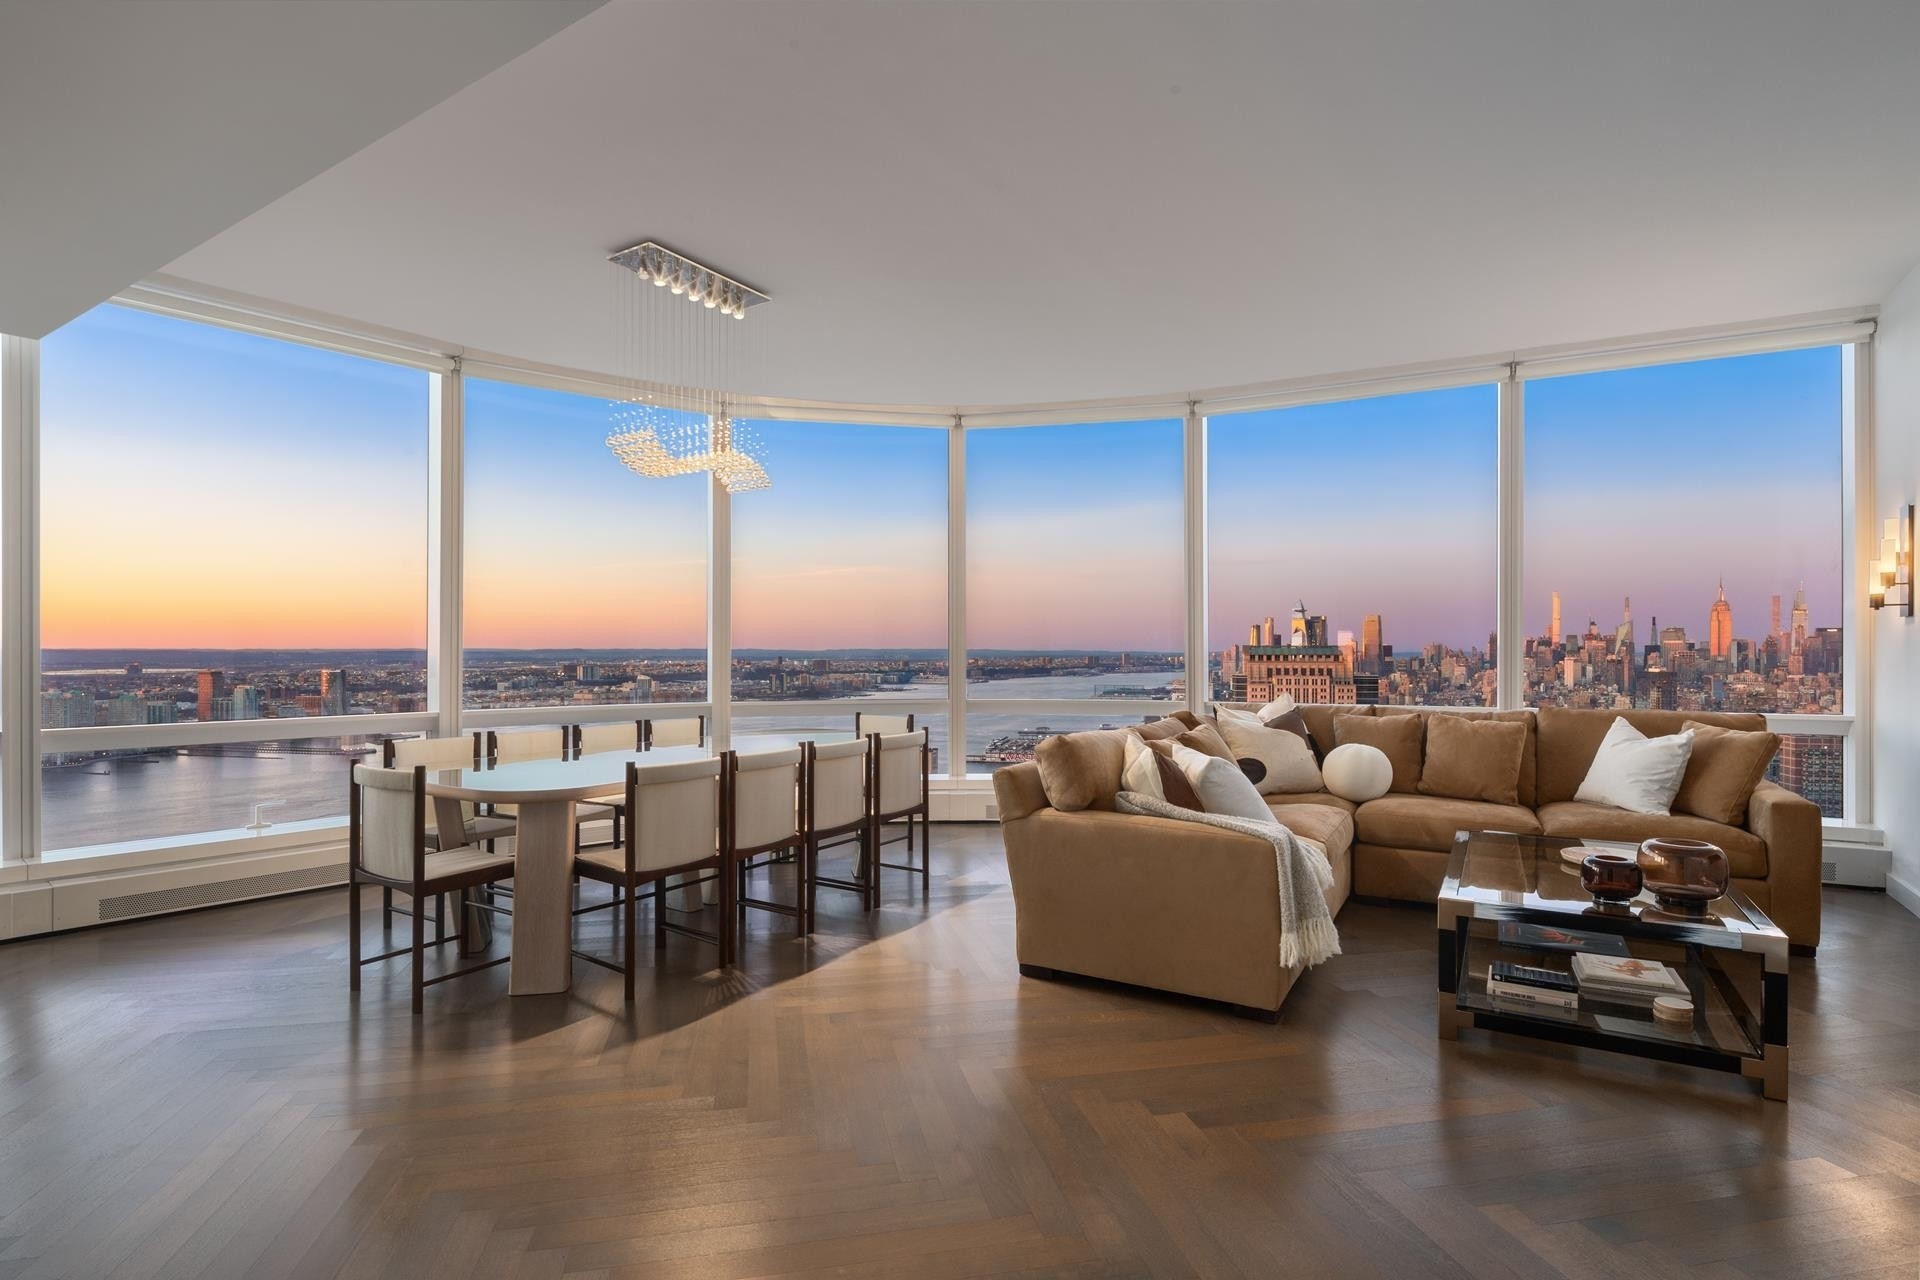 2. Condominiums for Sale at One Eleven Murray S, 111 MURRAY ST, 45WEST TriBeCa, New York, NY 10007